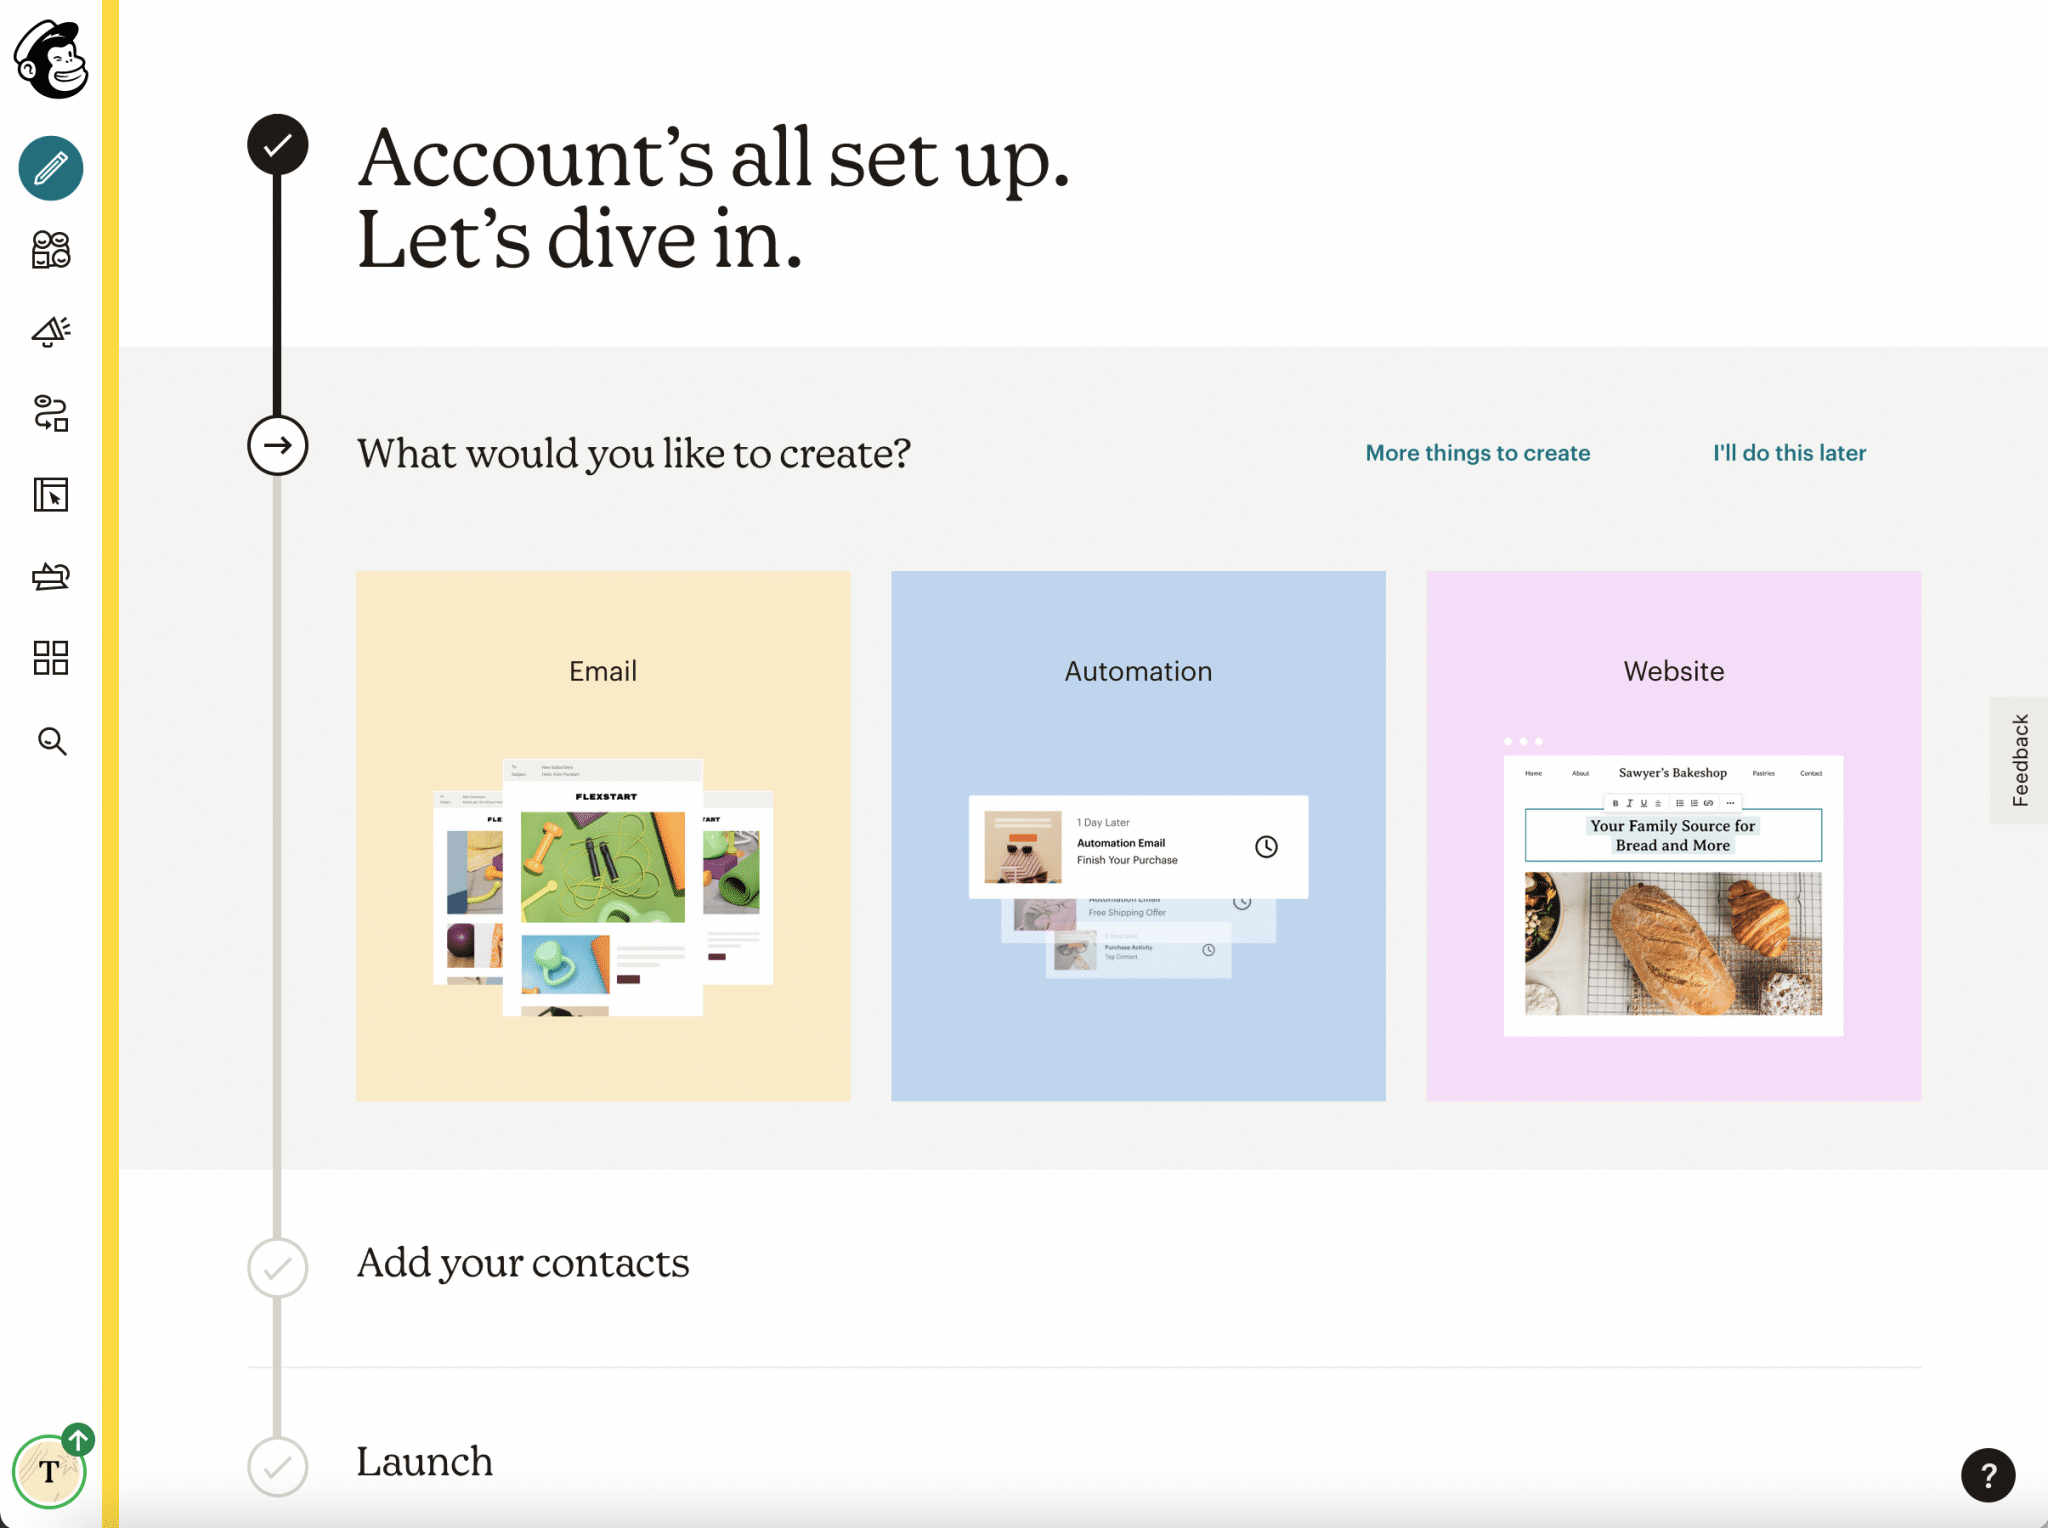 Mailchimp's dashboard after the account creation.